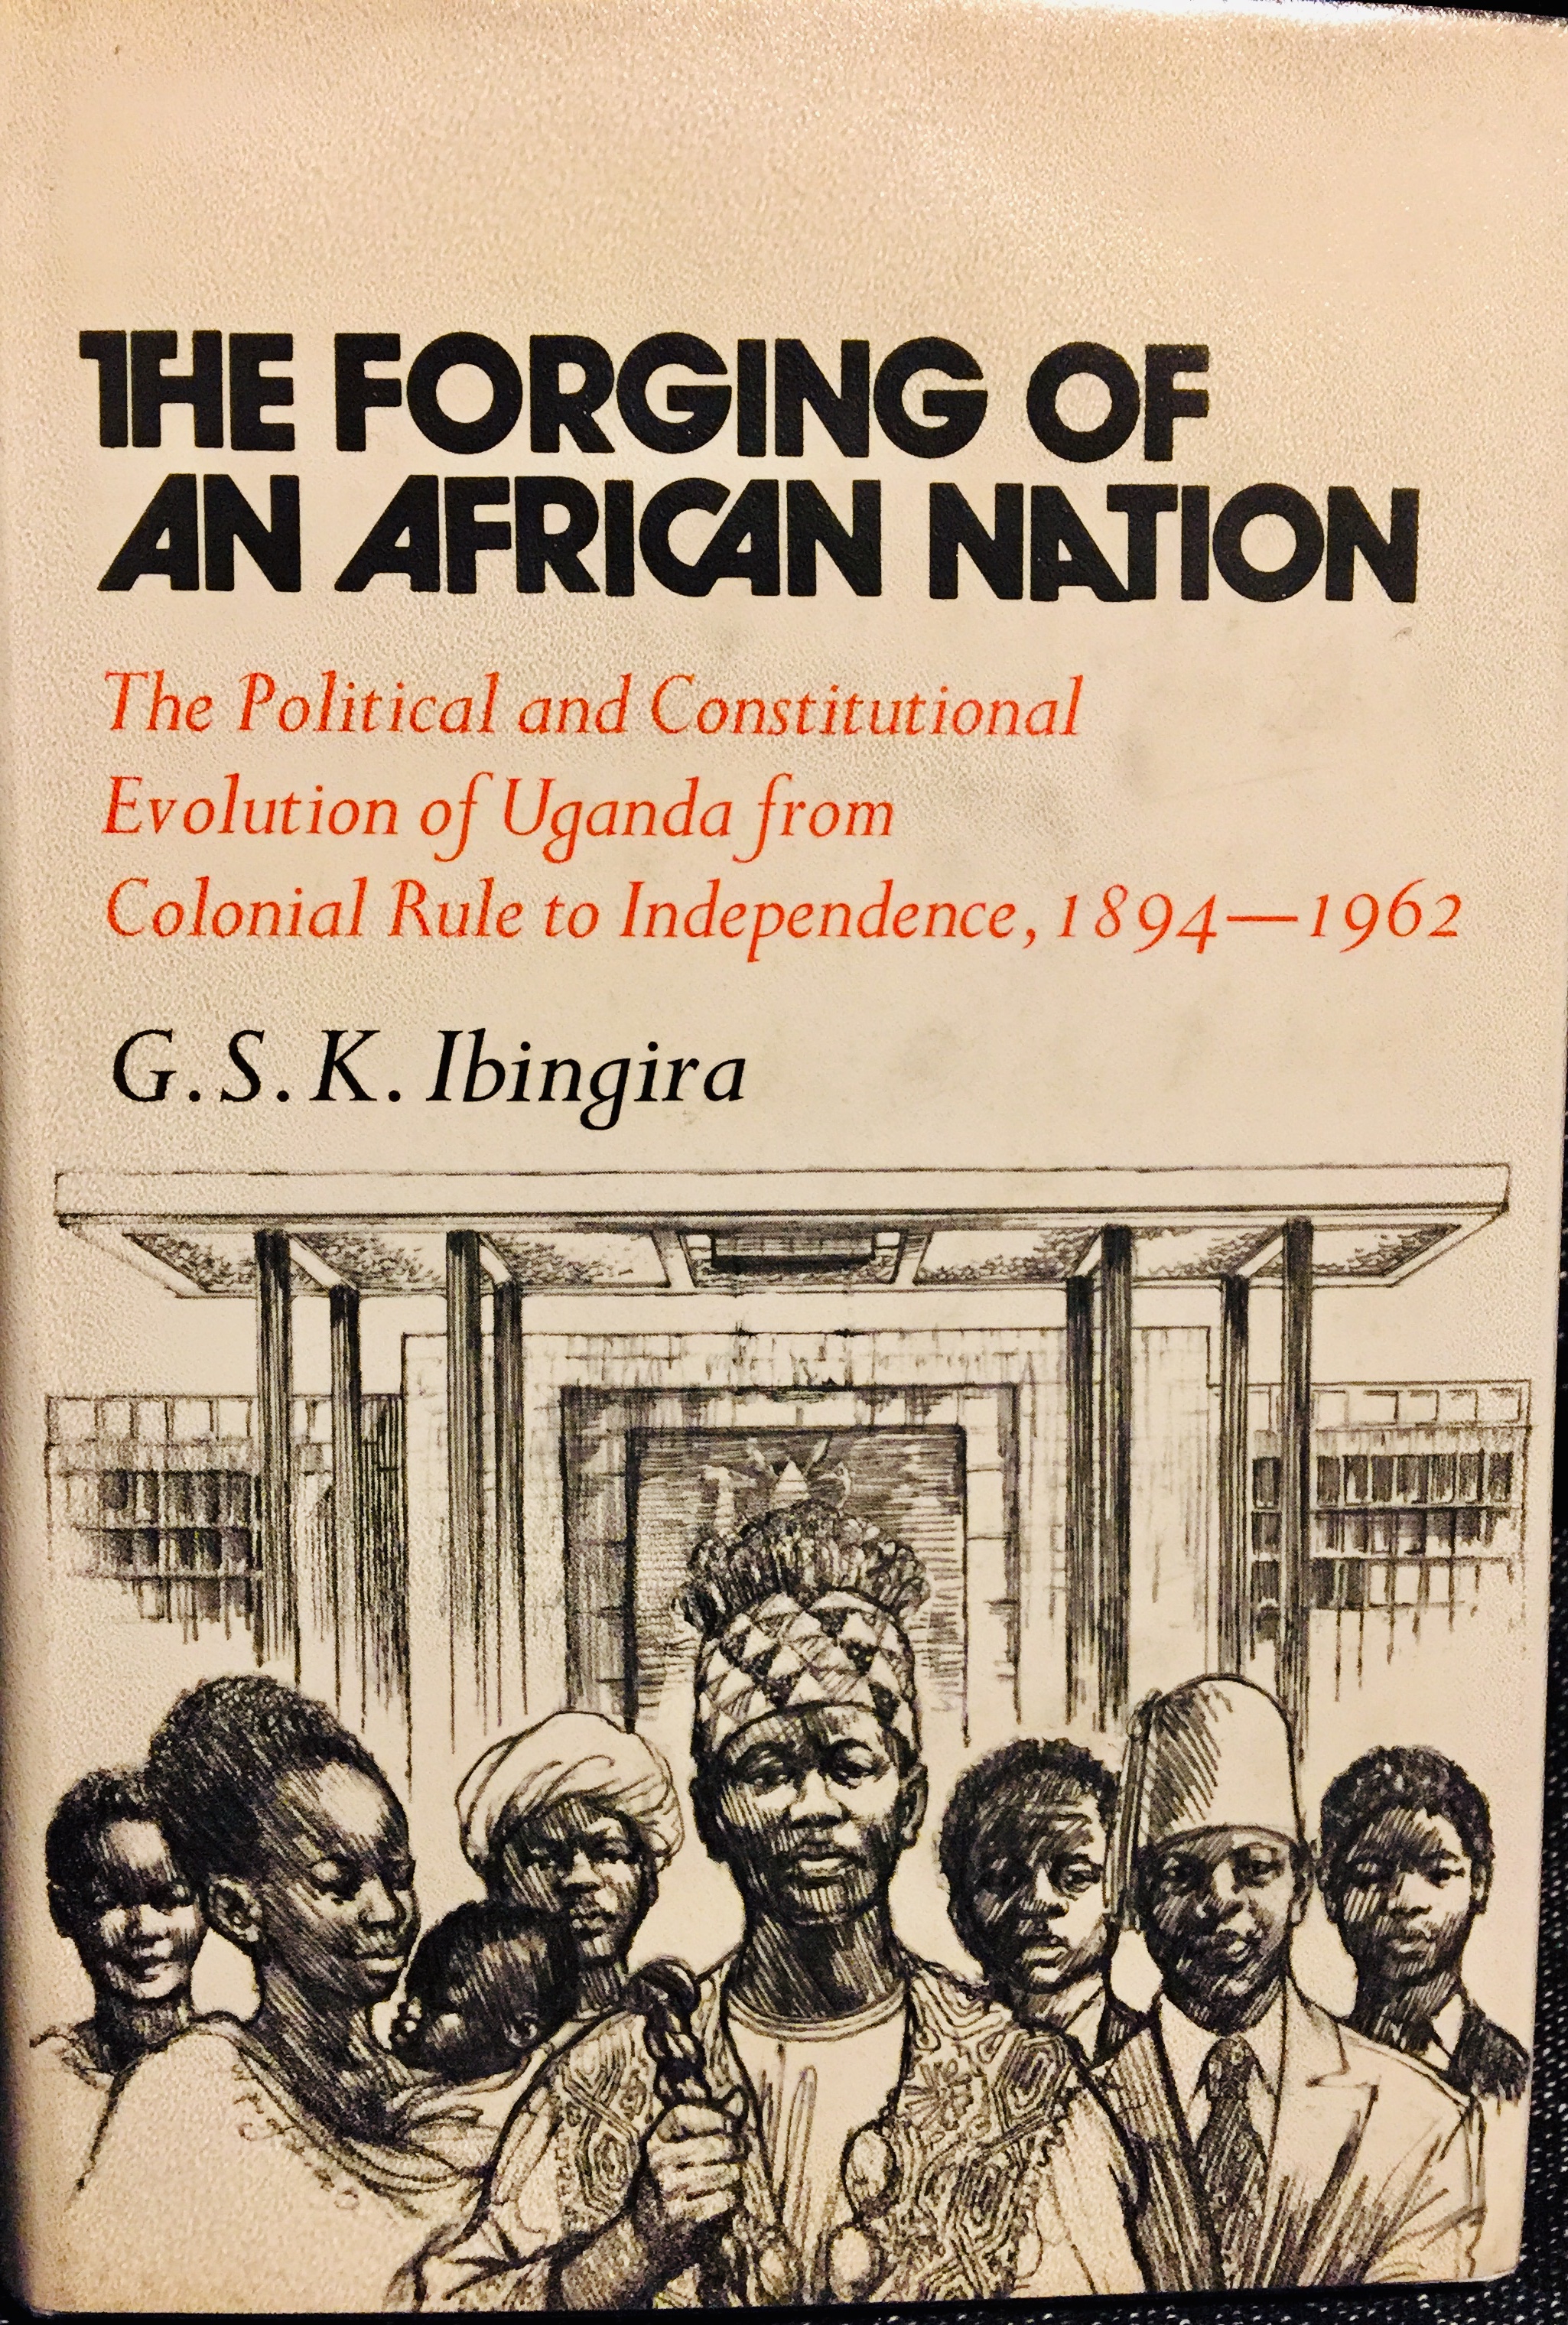 The Forging of an African Nation: The Political and Constitutional Evolution of Uganda from Colonial Rule to Independence, 1894-1962 – By G.S.K Ibingira (1973)